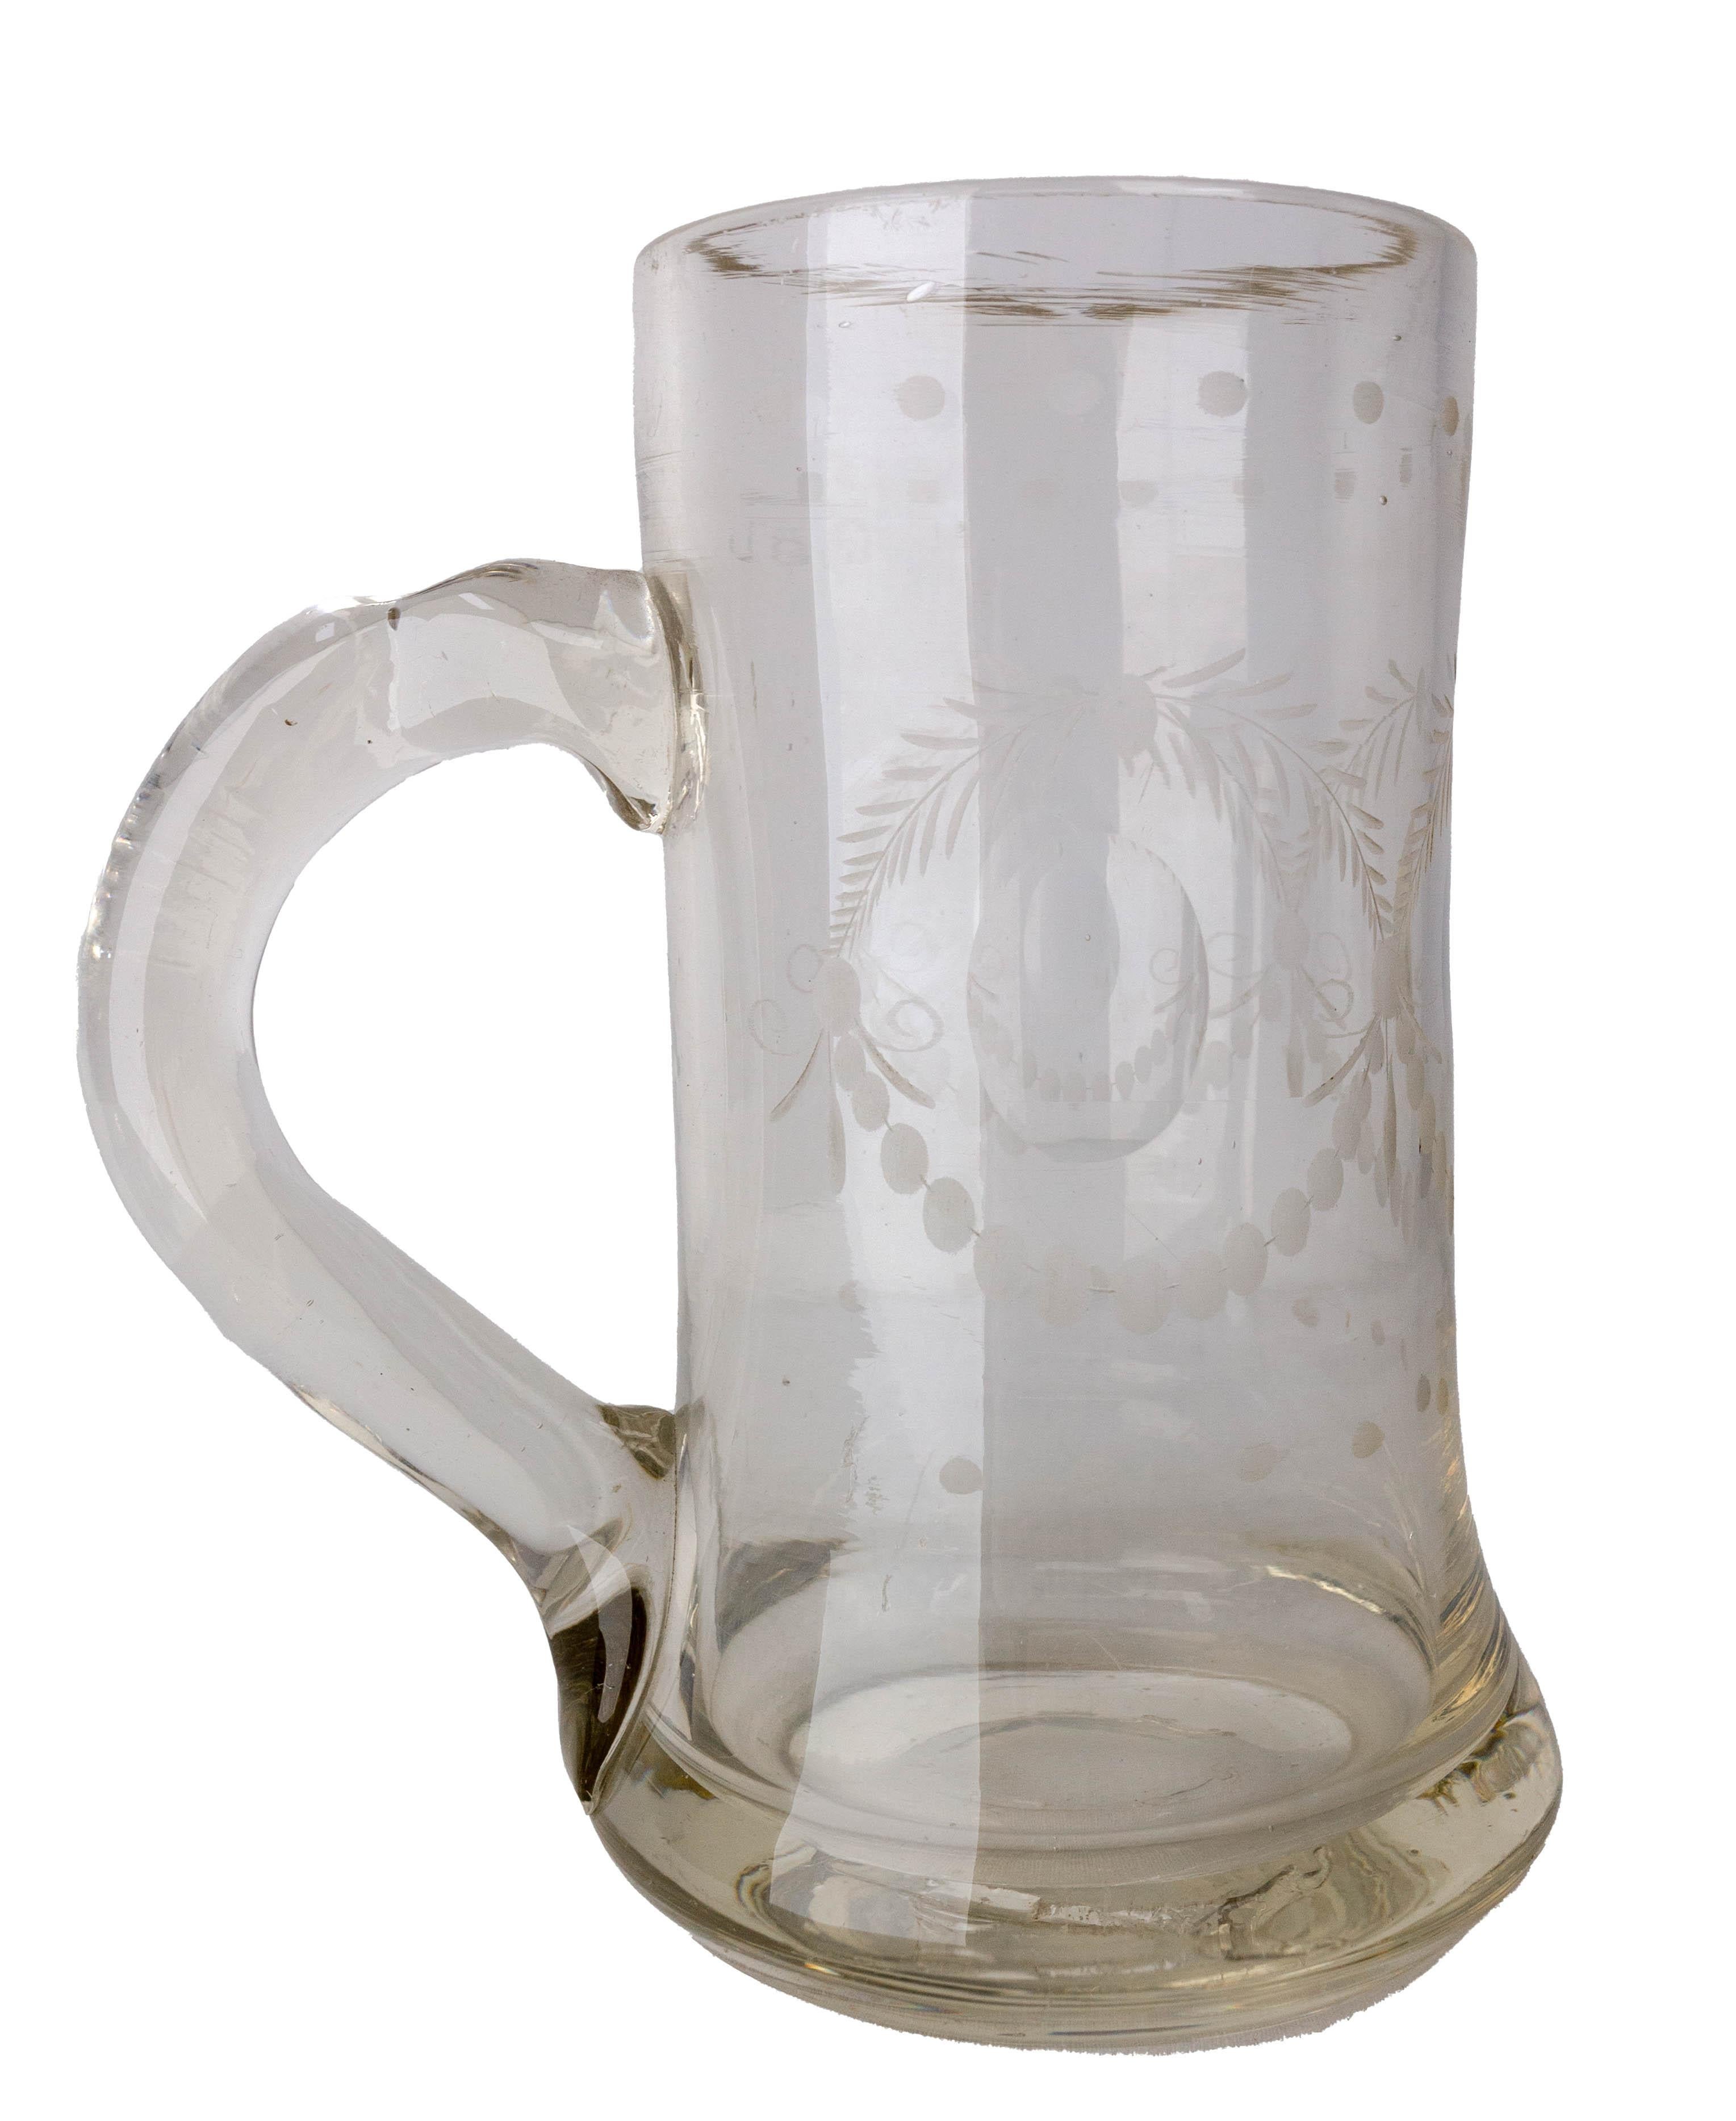 Engraved beer mug French, circa 1890.
Engraving of a floral decoration.
One pint

Shipping: 
L 14 P 10 H 16.